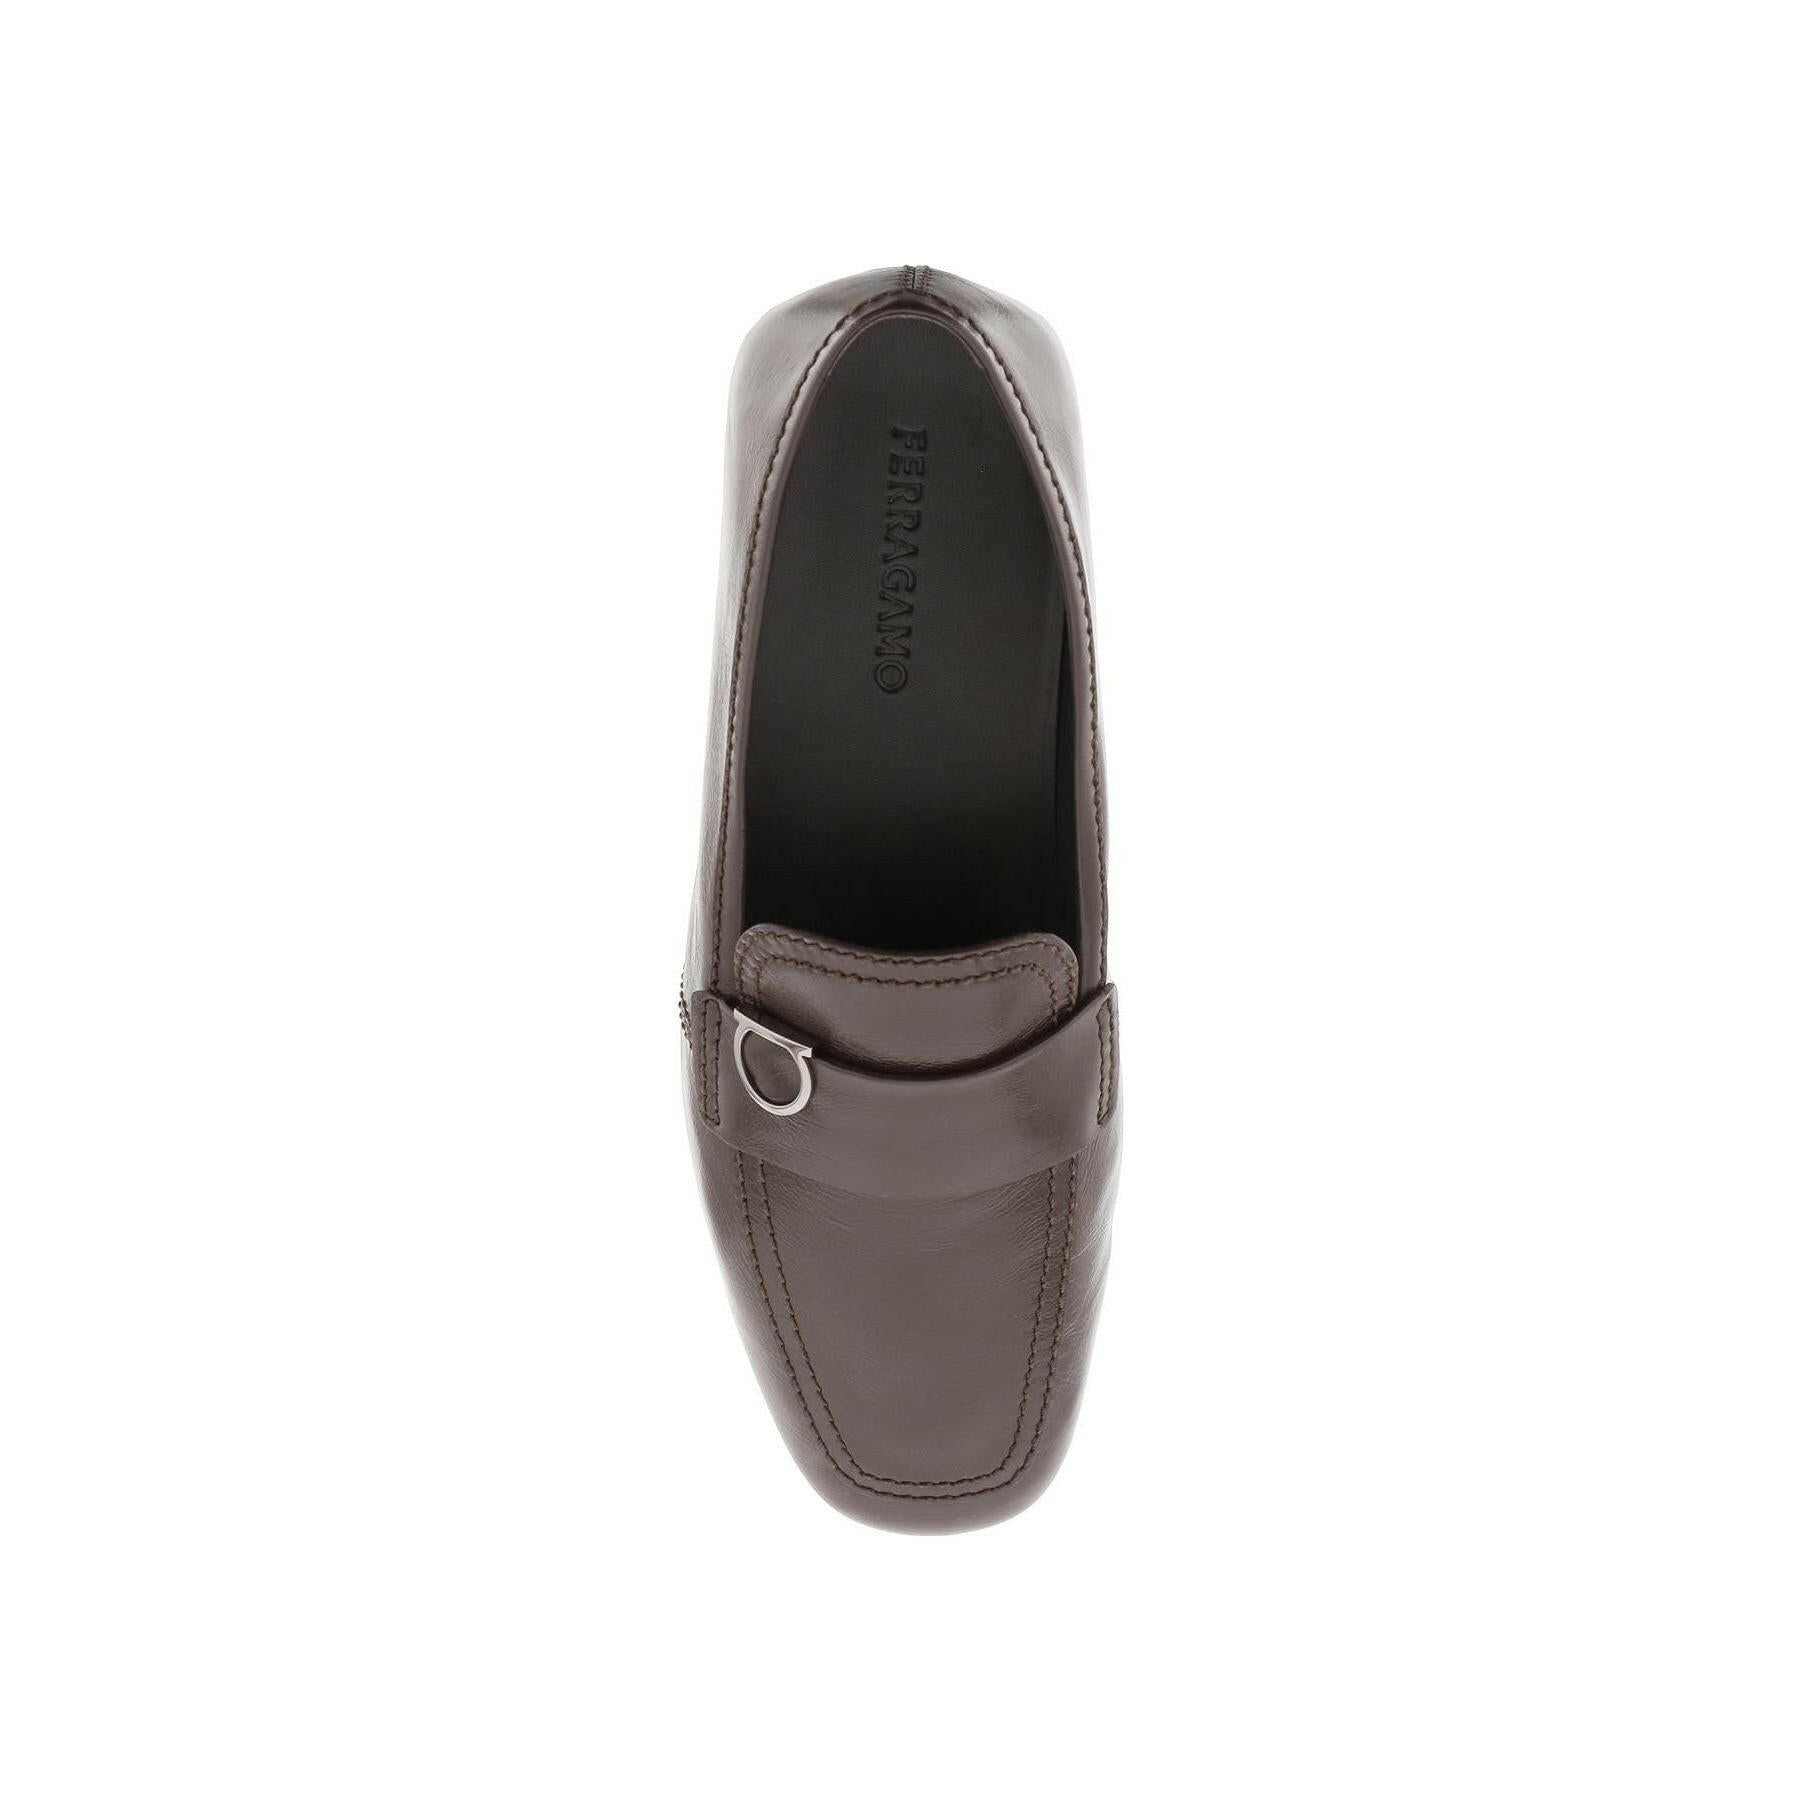 Debros Leather Loafers